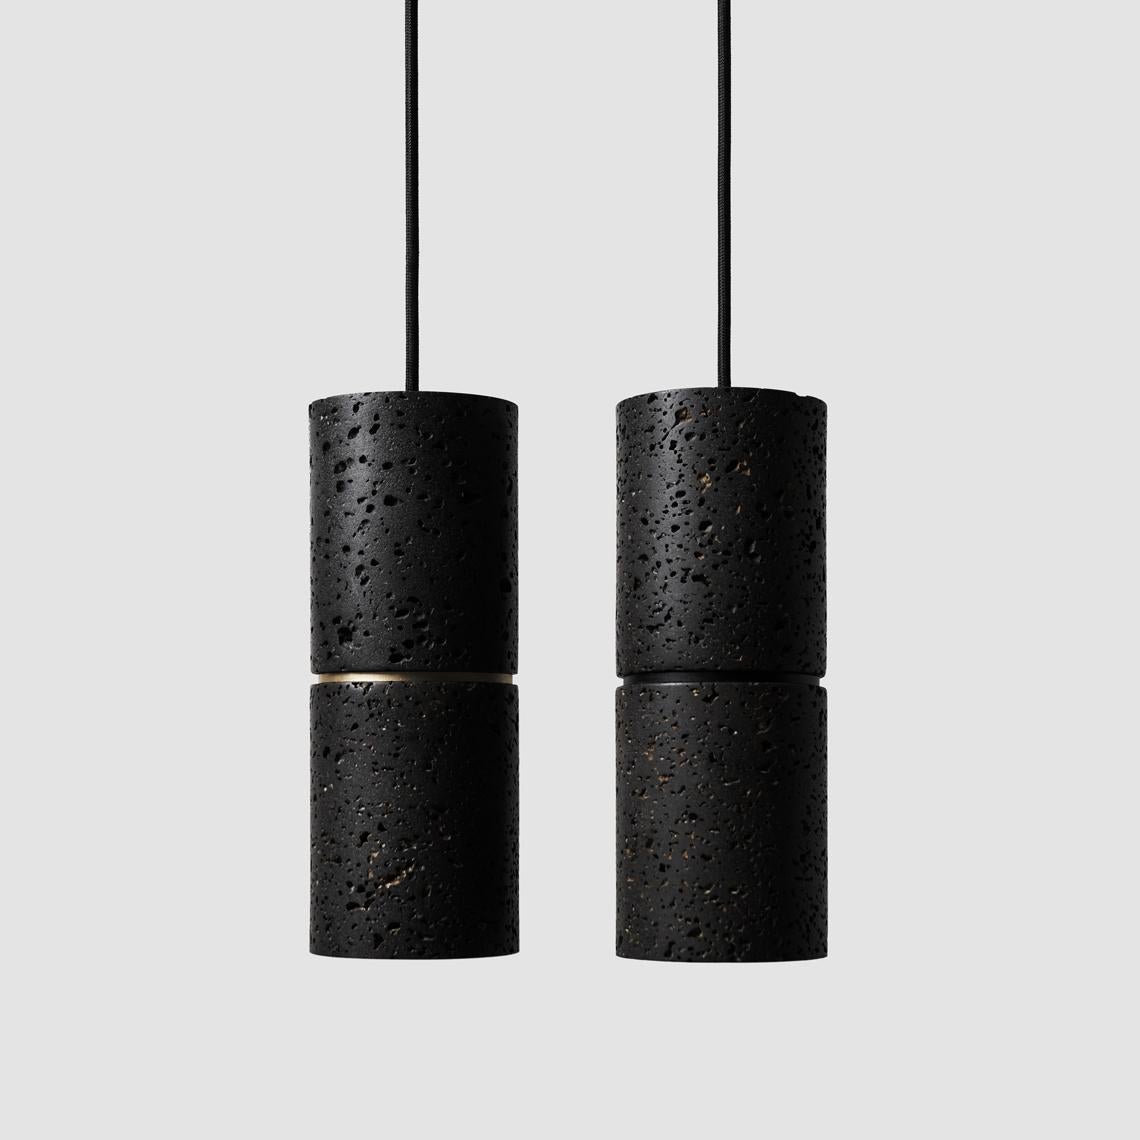 Pendant lamp 'RI' by Buzao x Bentu Design. 
Black lava stone and white marble versions available.

(Sold individually)

26,5 cm high; 10 cm Diameter
Wire: 2 meters black (adjustable)

Brass (gold) or aluminum (black) finish.

Lamp type: E27 LED 3W